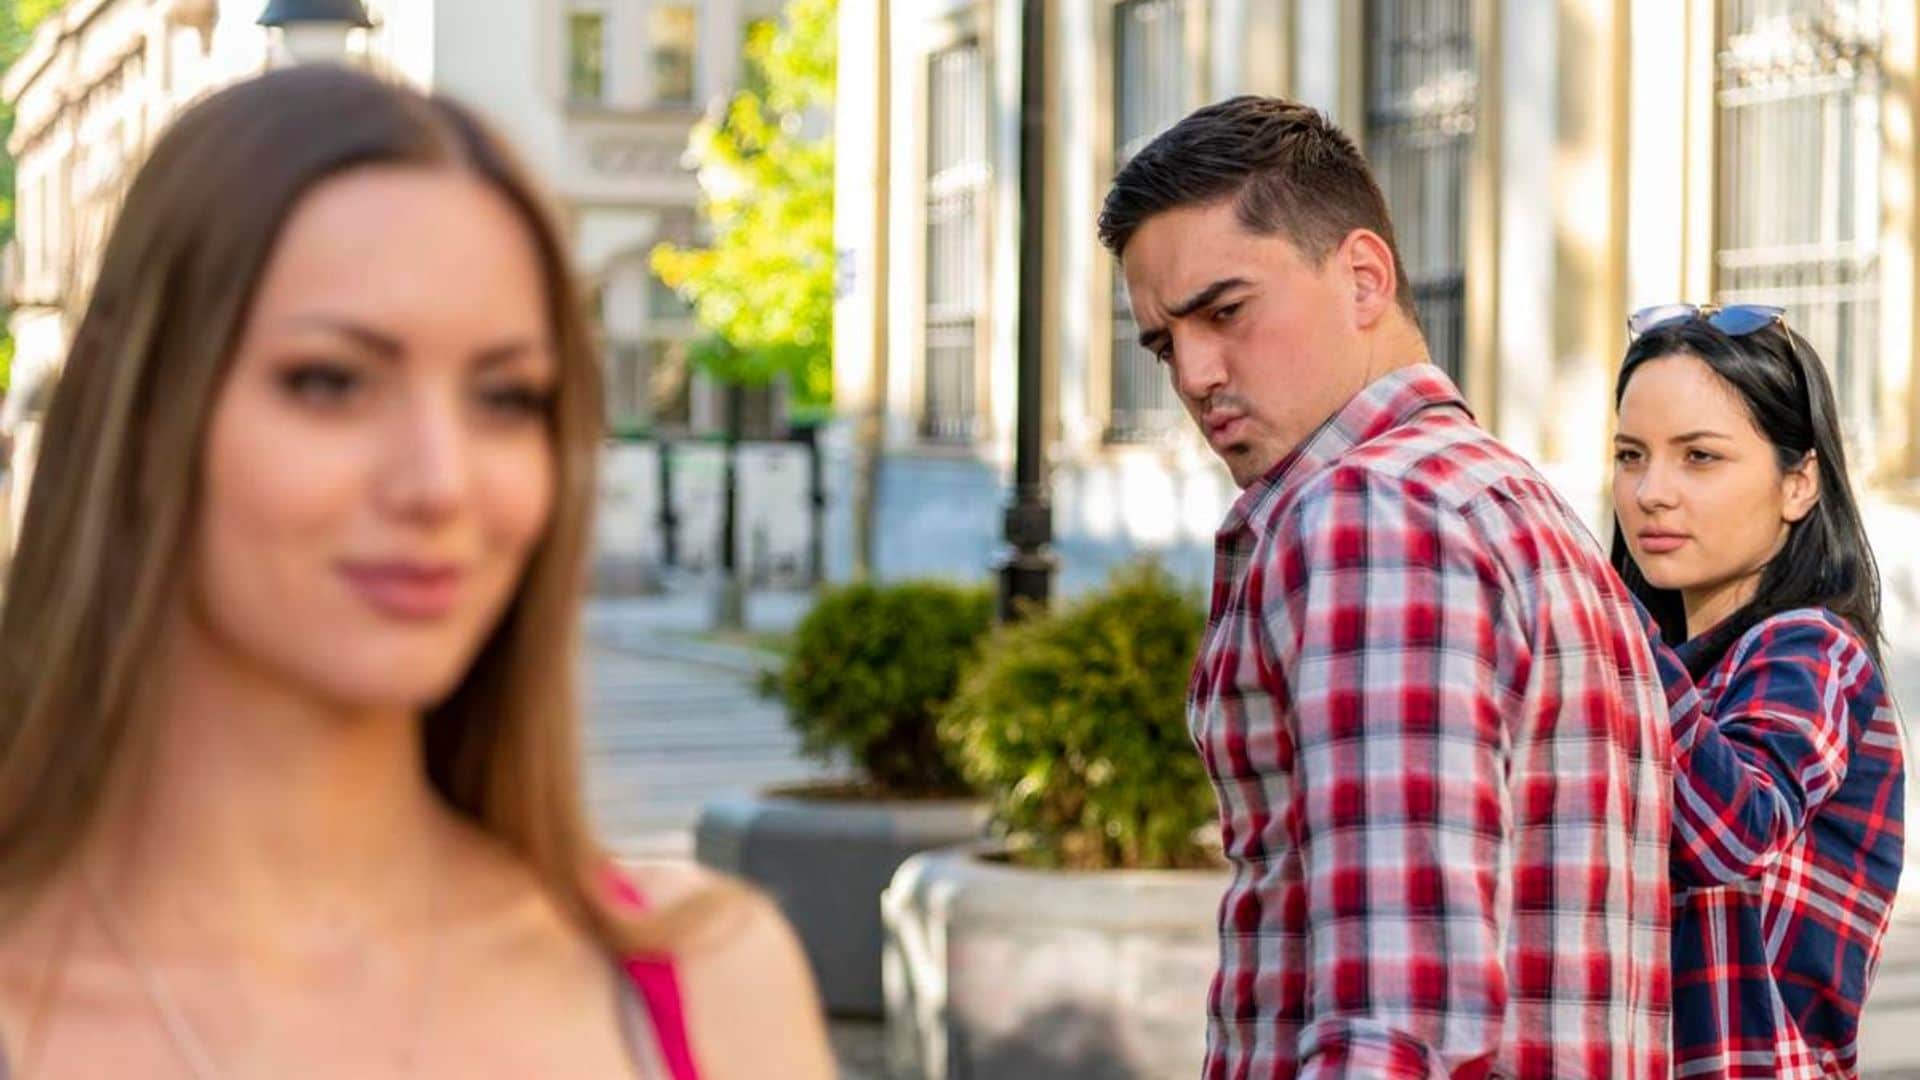 Five red flags of infidelity to watch out for according to dating experts